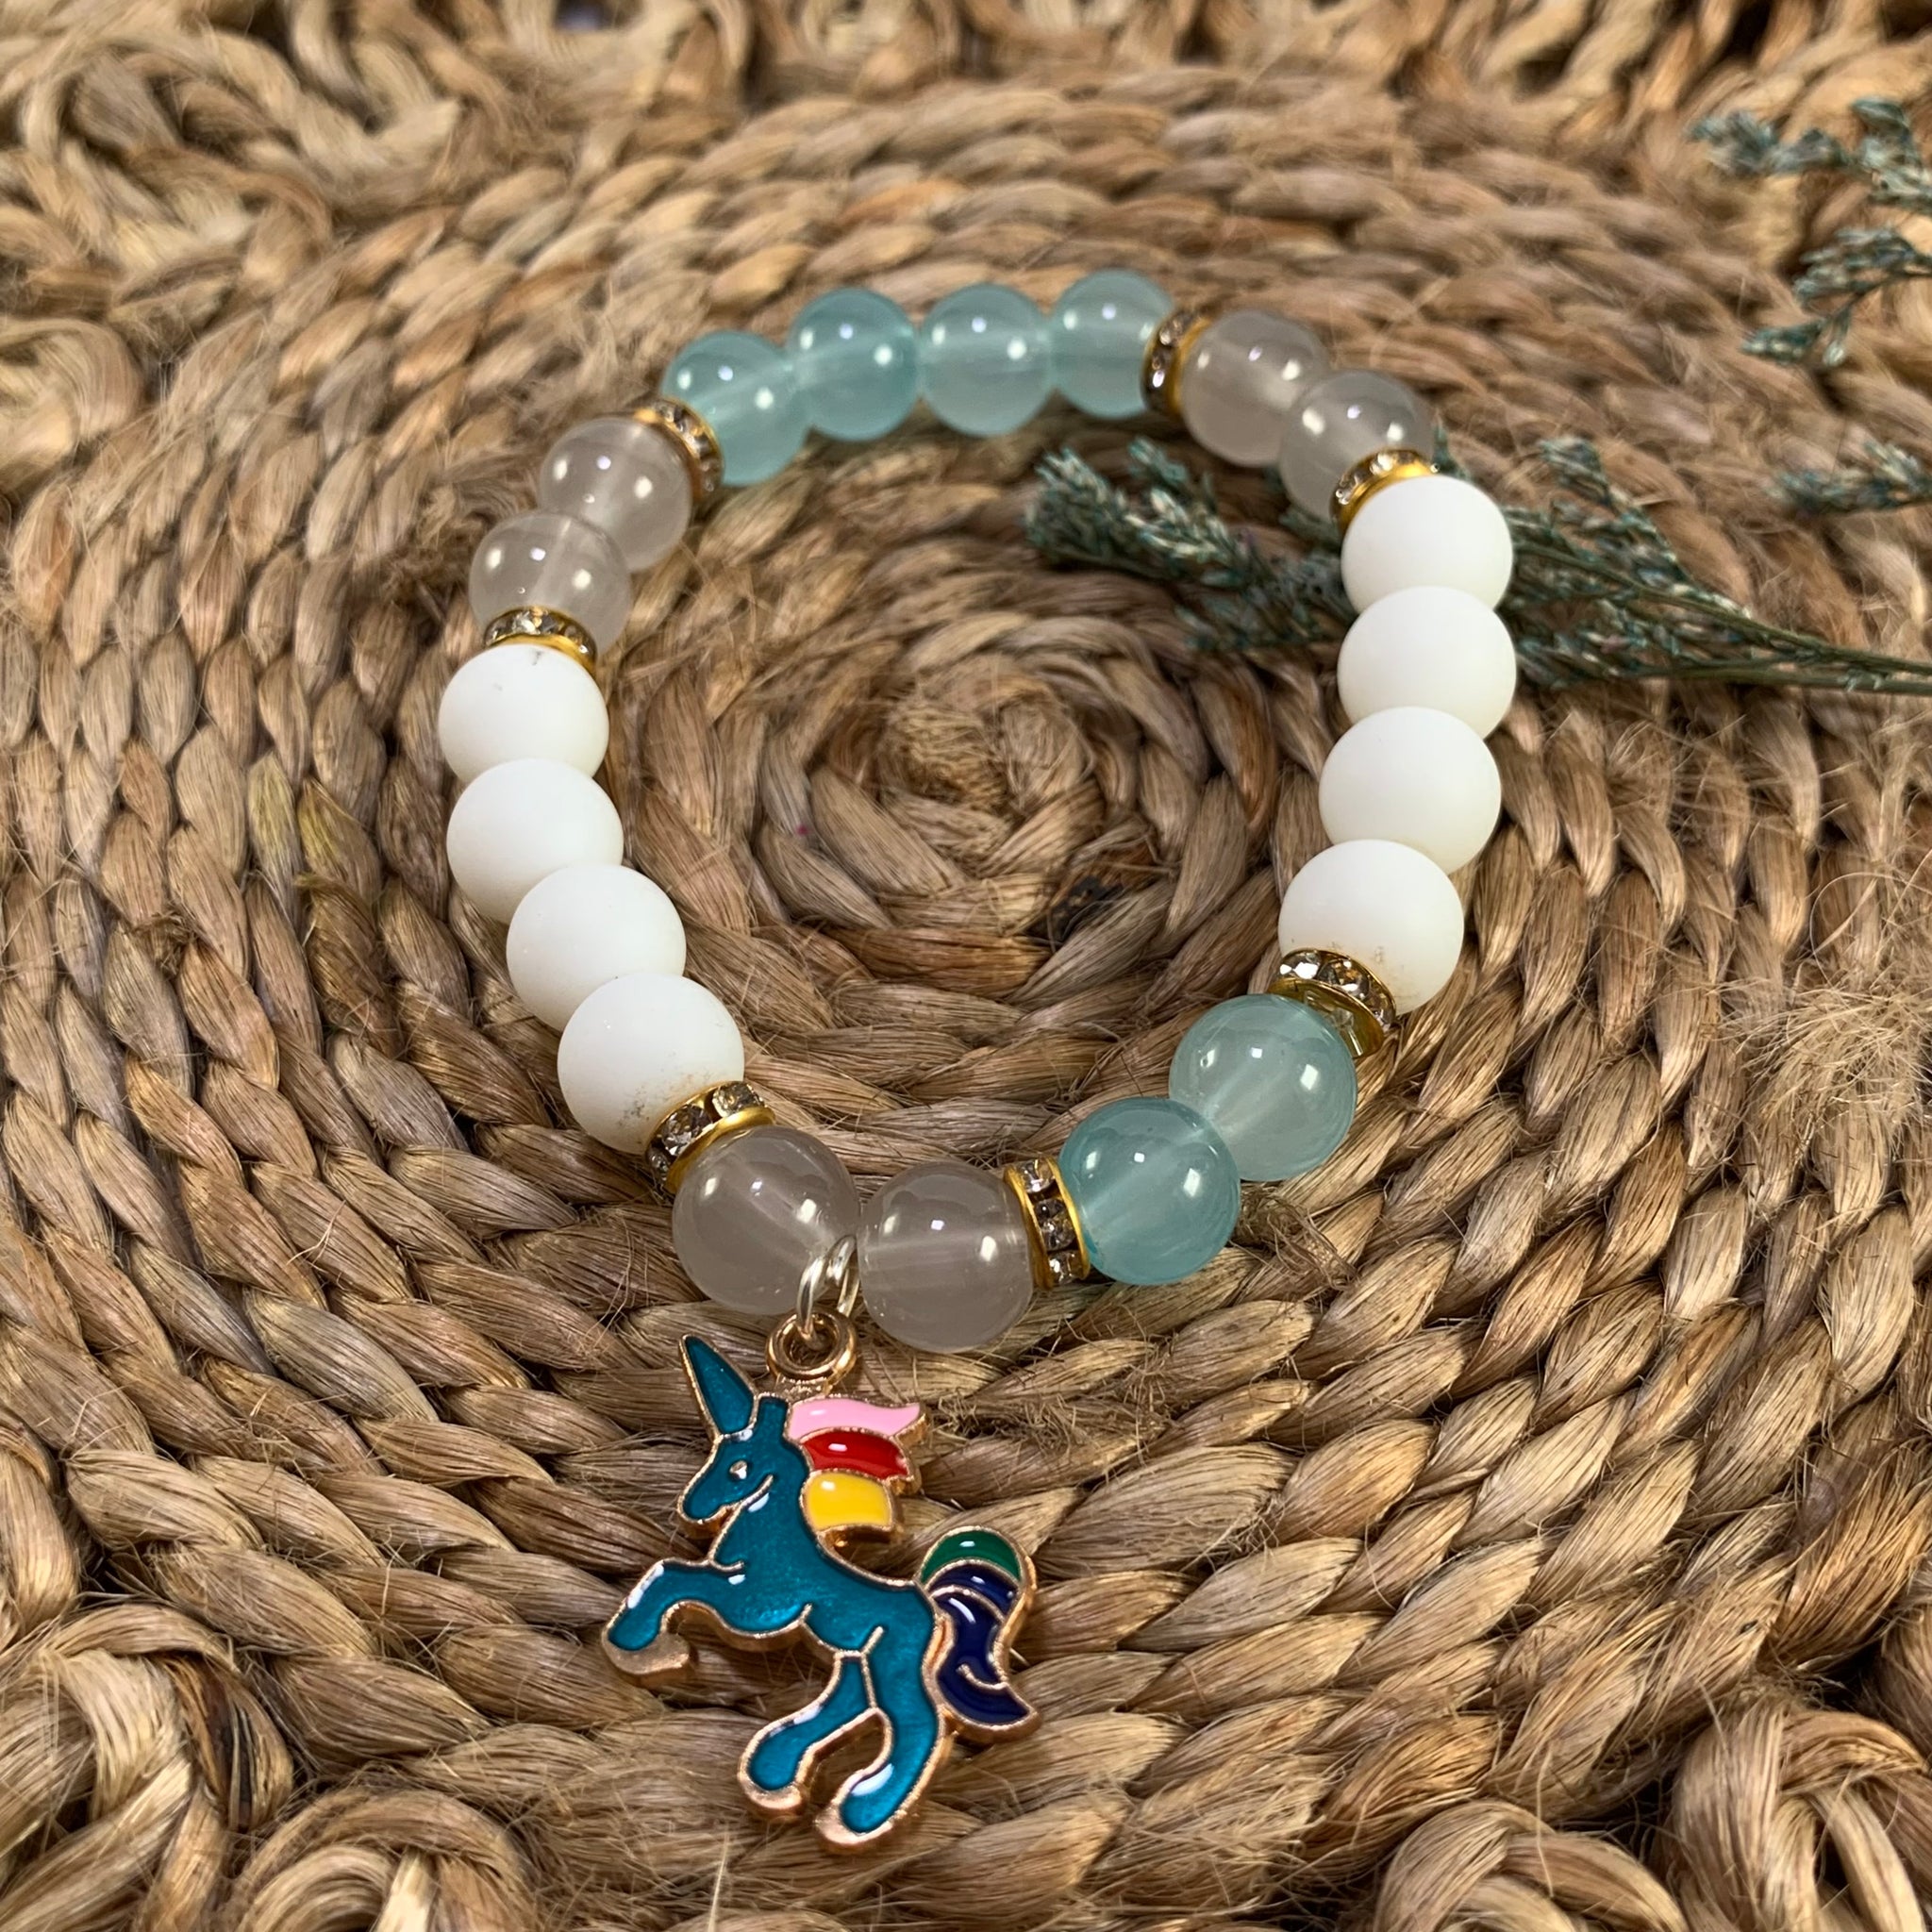 Jelly and mate beads bracelet with unicorn charm